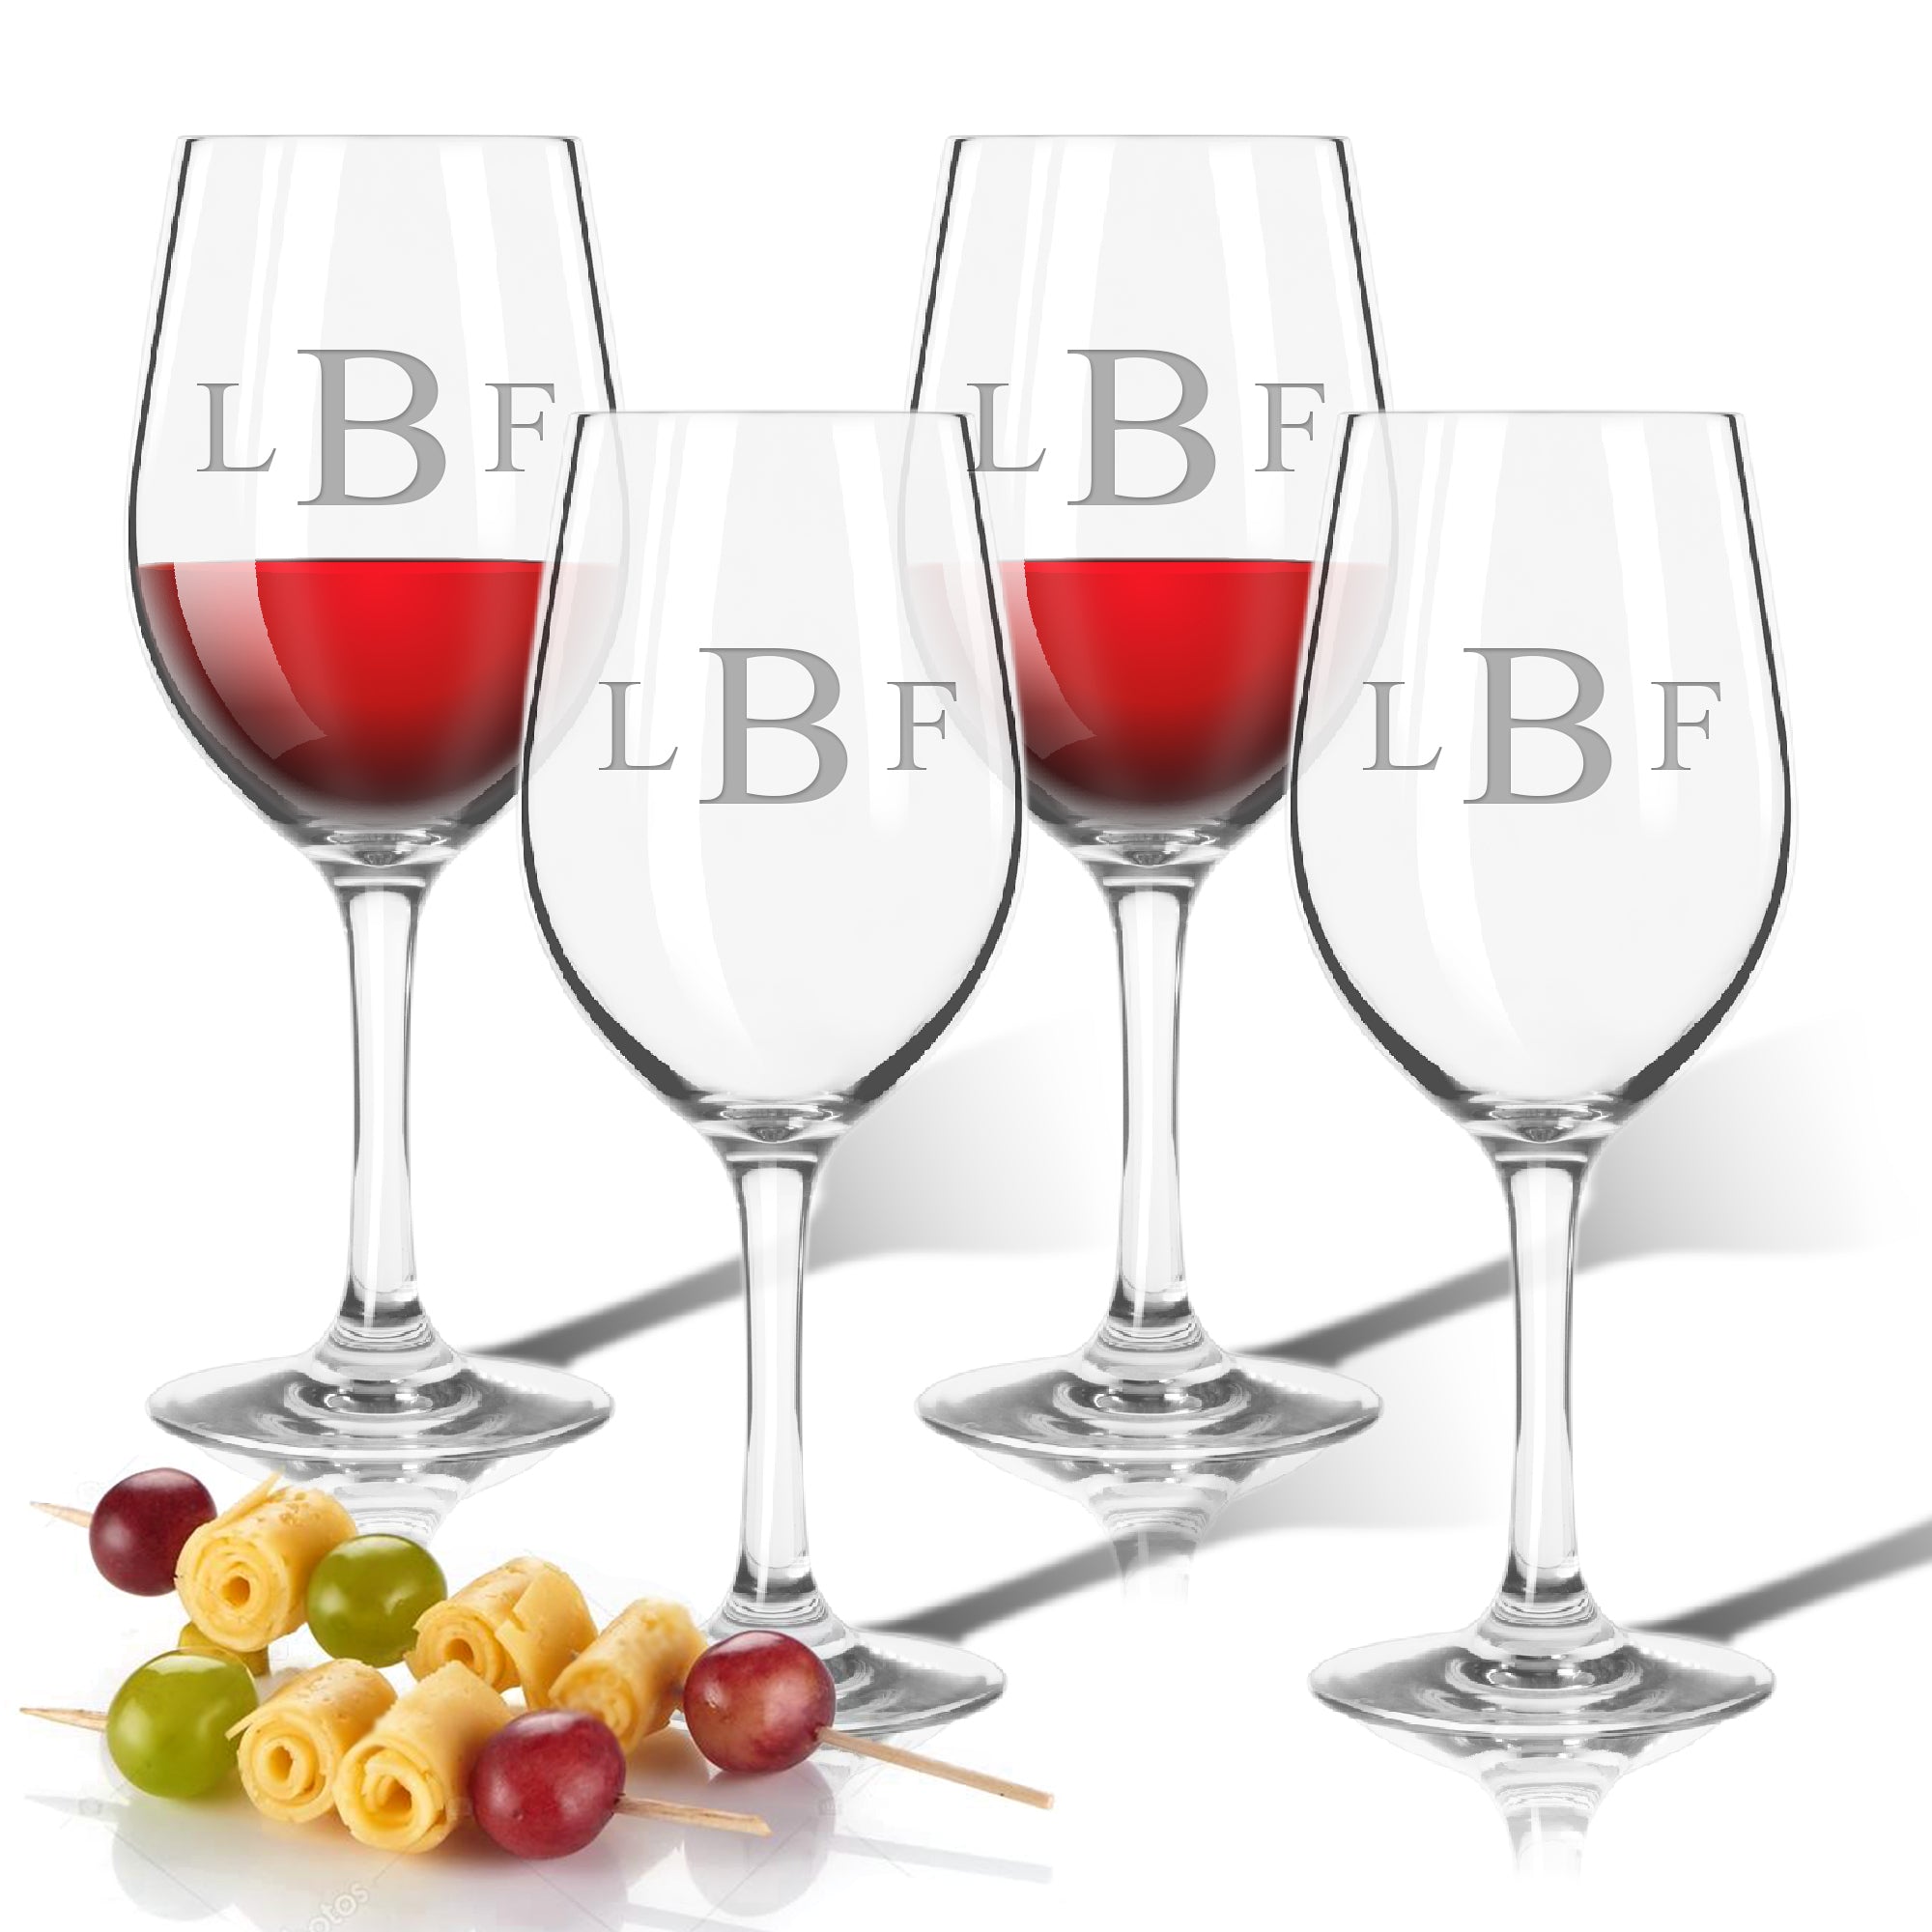 12 oz. Plastic All Purpose Wine Glass (Set of 4) Carved Solutions Customize: Yes